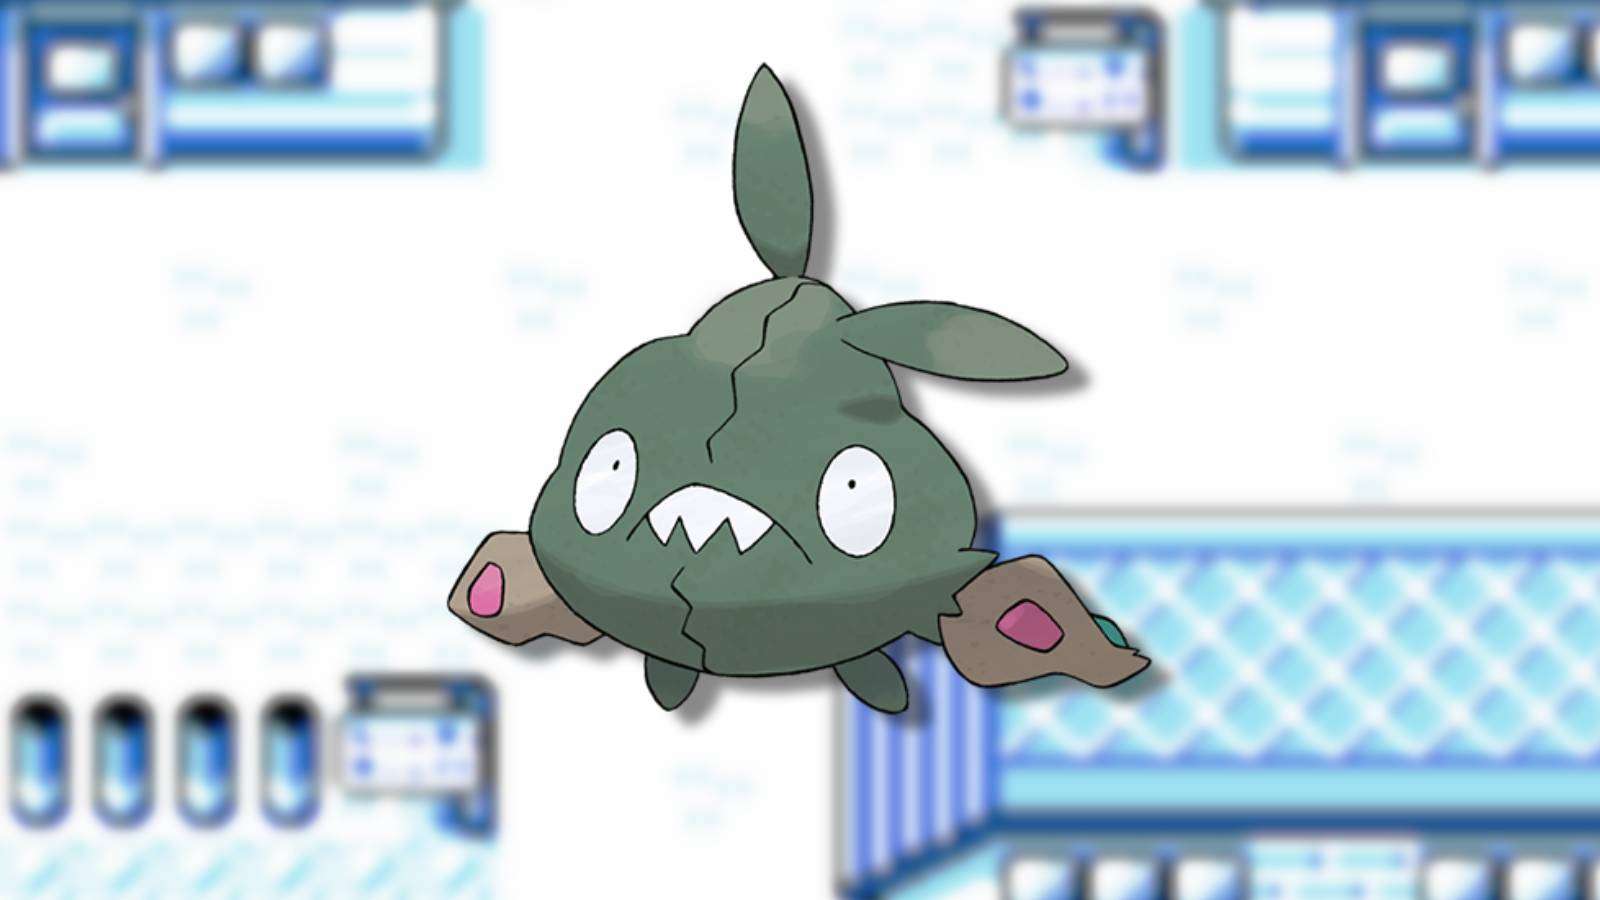 The Pokemon Trubbish appears against a blurred background